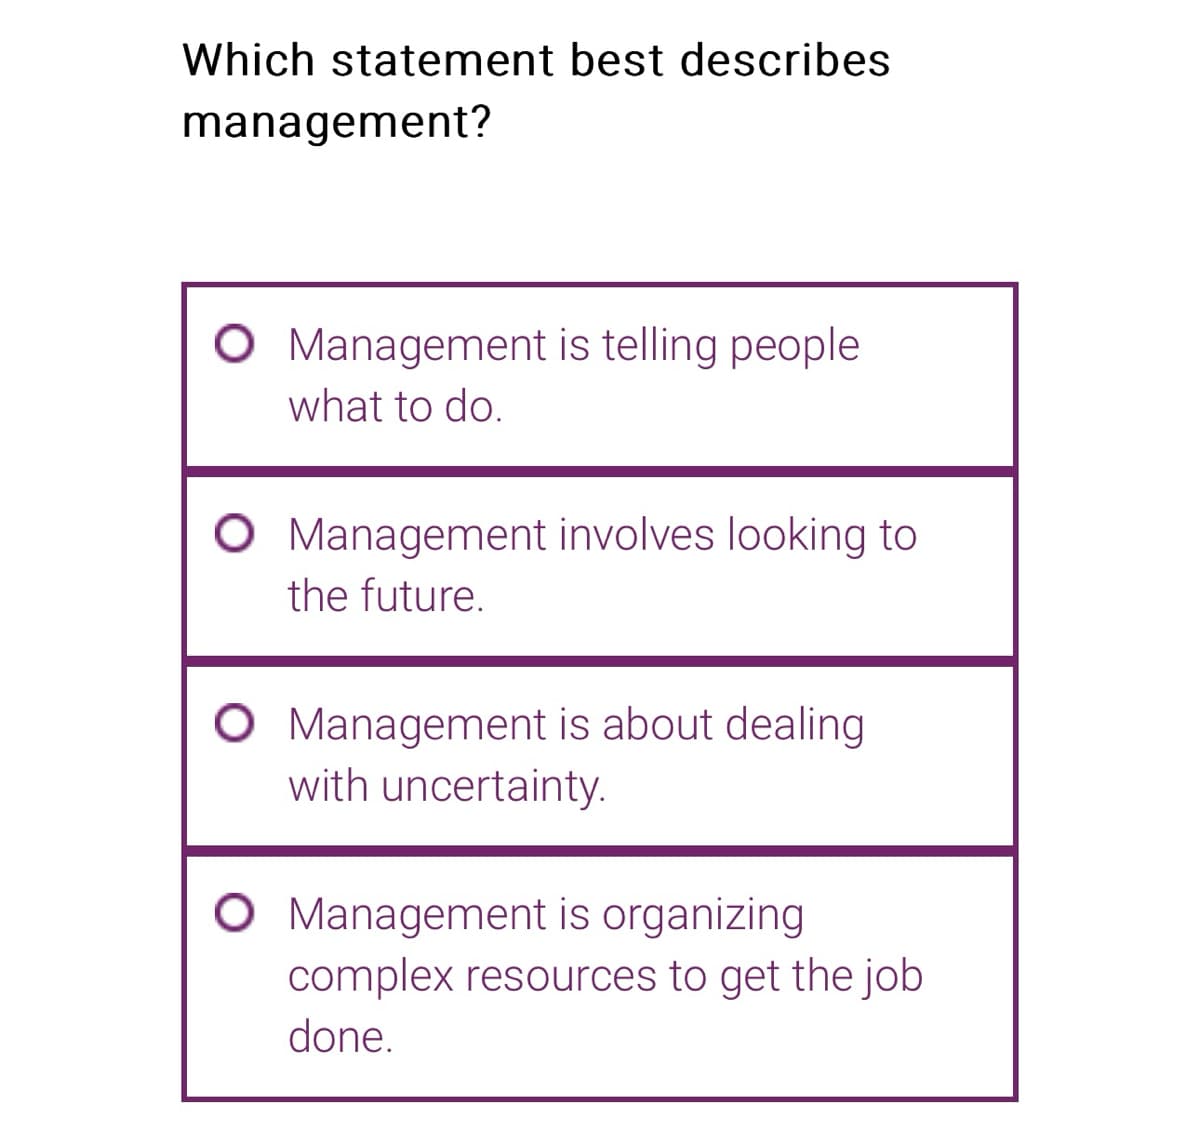 Which statement best describes
management?
O Management is telling people
what to do.
O Management involves looking to
the future.
O Management is about dealing
with uncertainty.
O Management is organizing
complex resources to get the job
done.